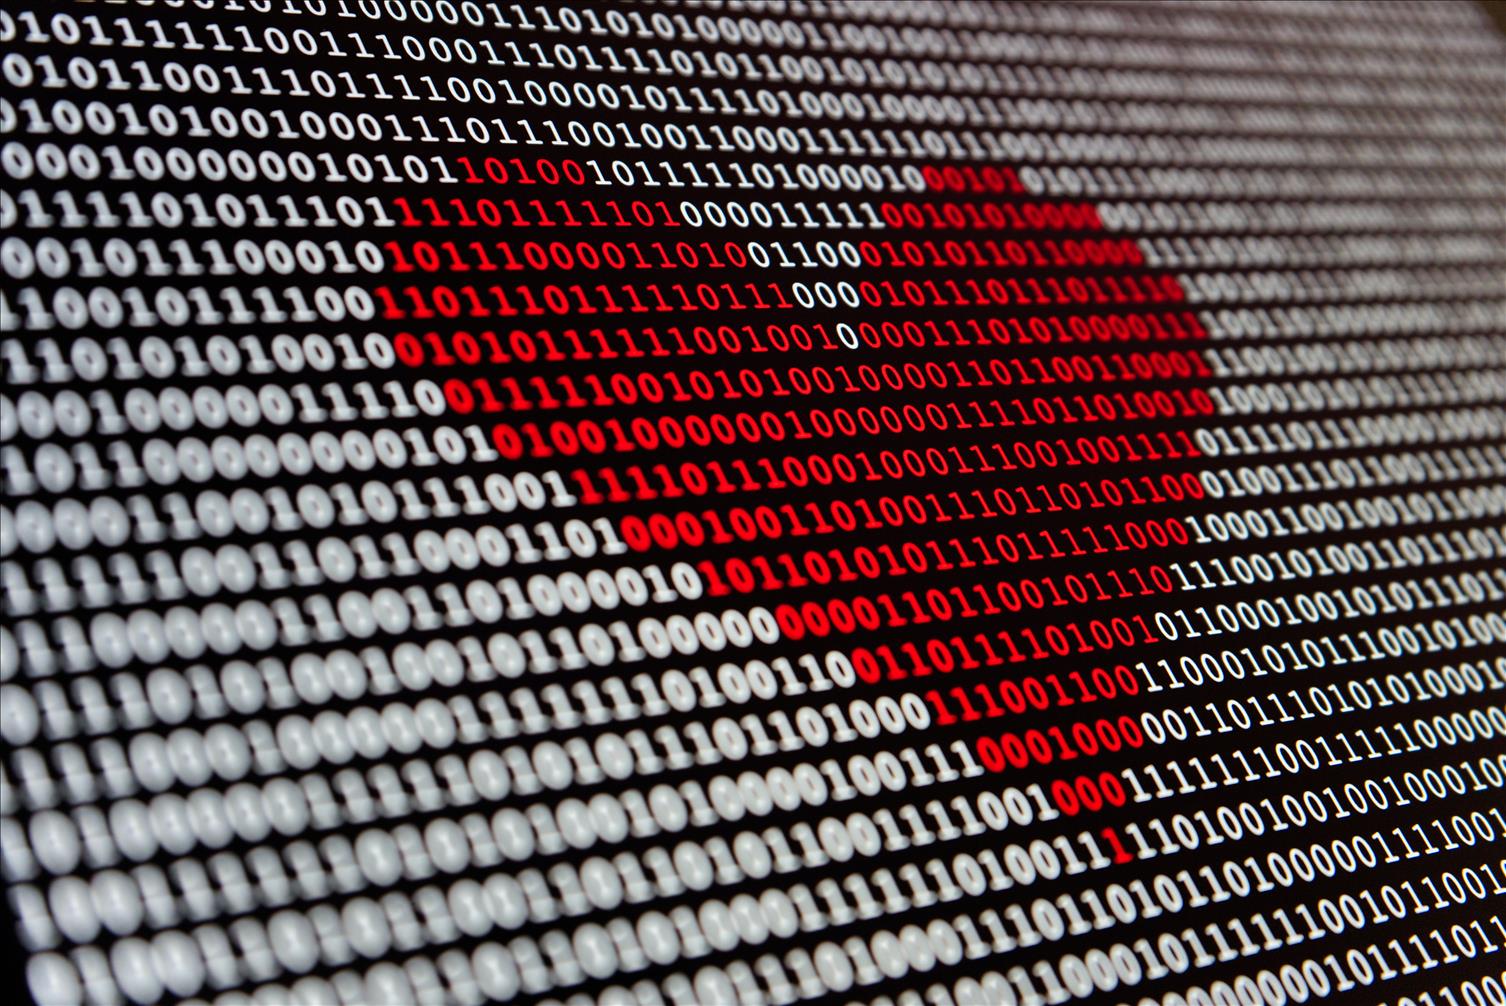 'Protestware' Is On The Rise, With Programmers Self-Sabotaging Their Own Code. Should We Be Worried?